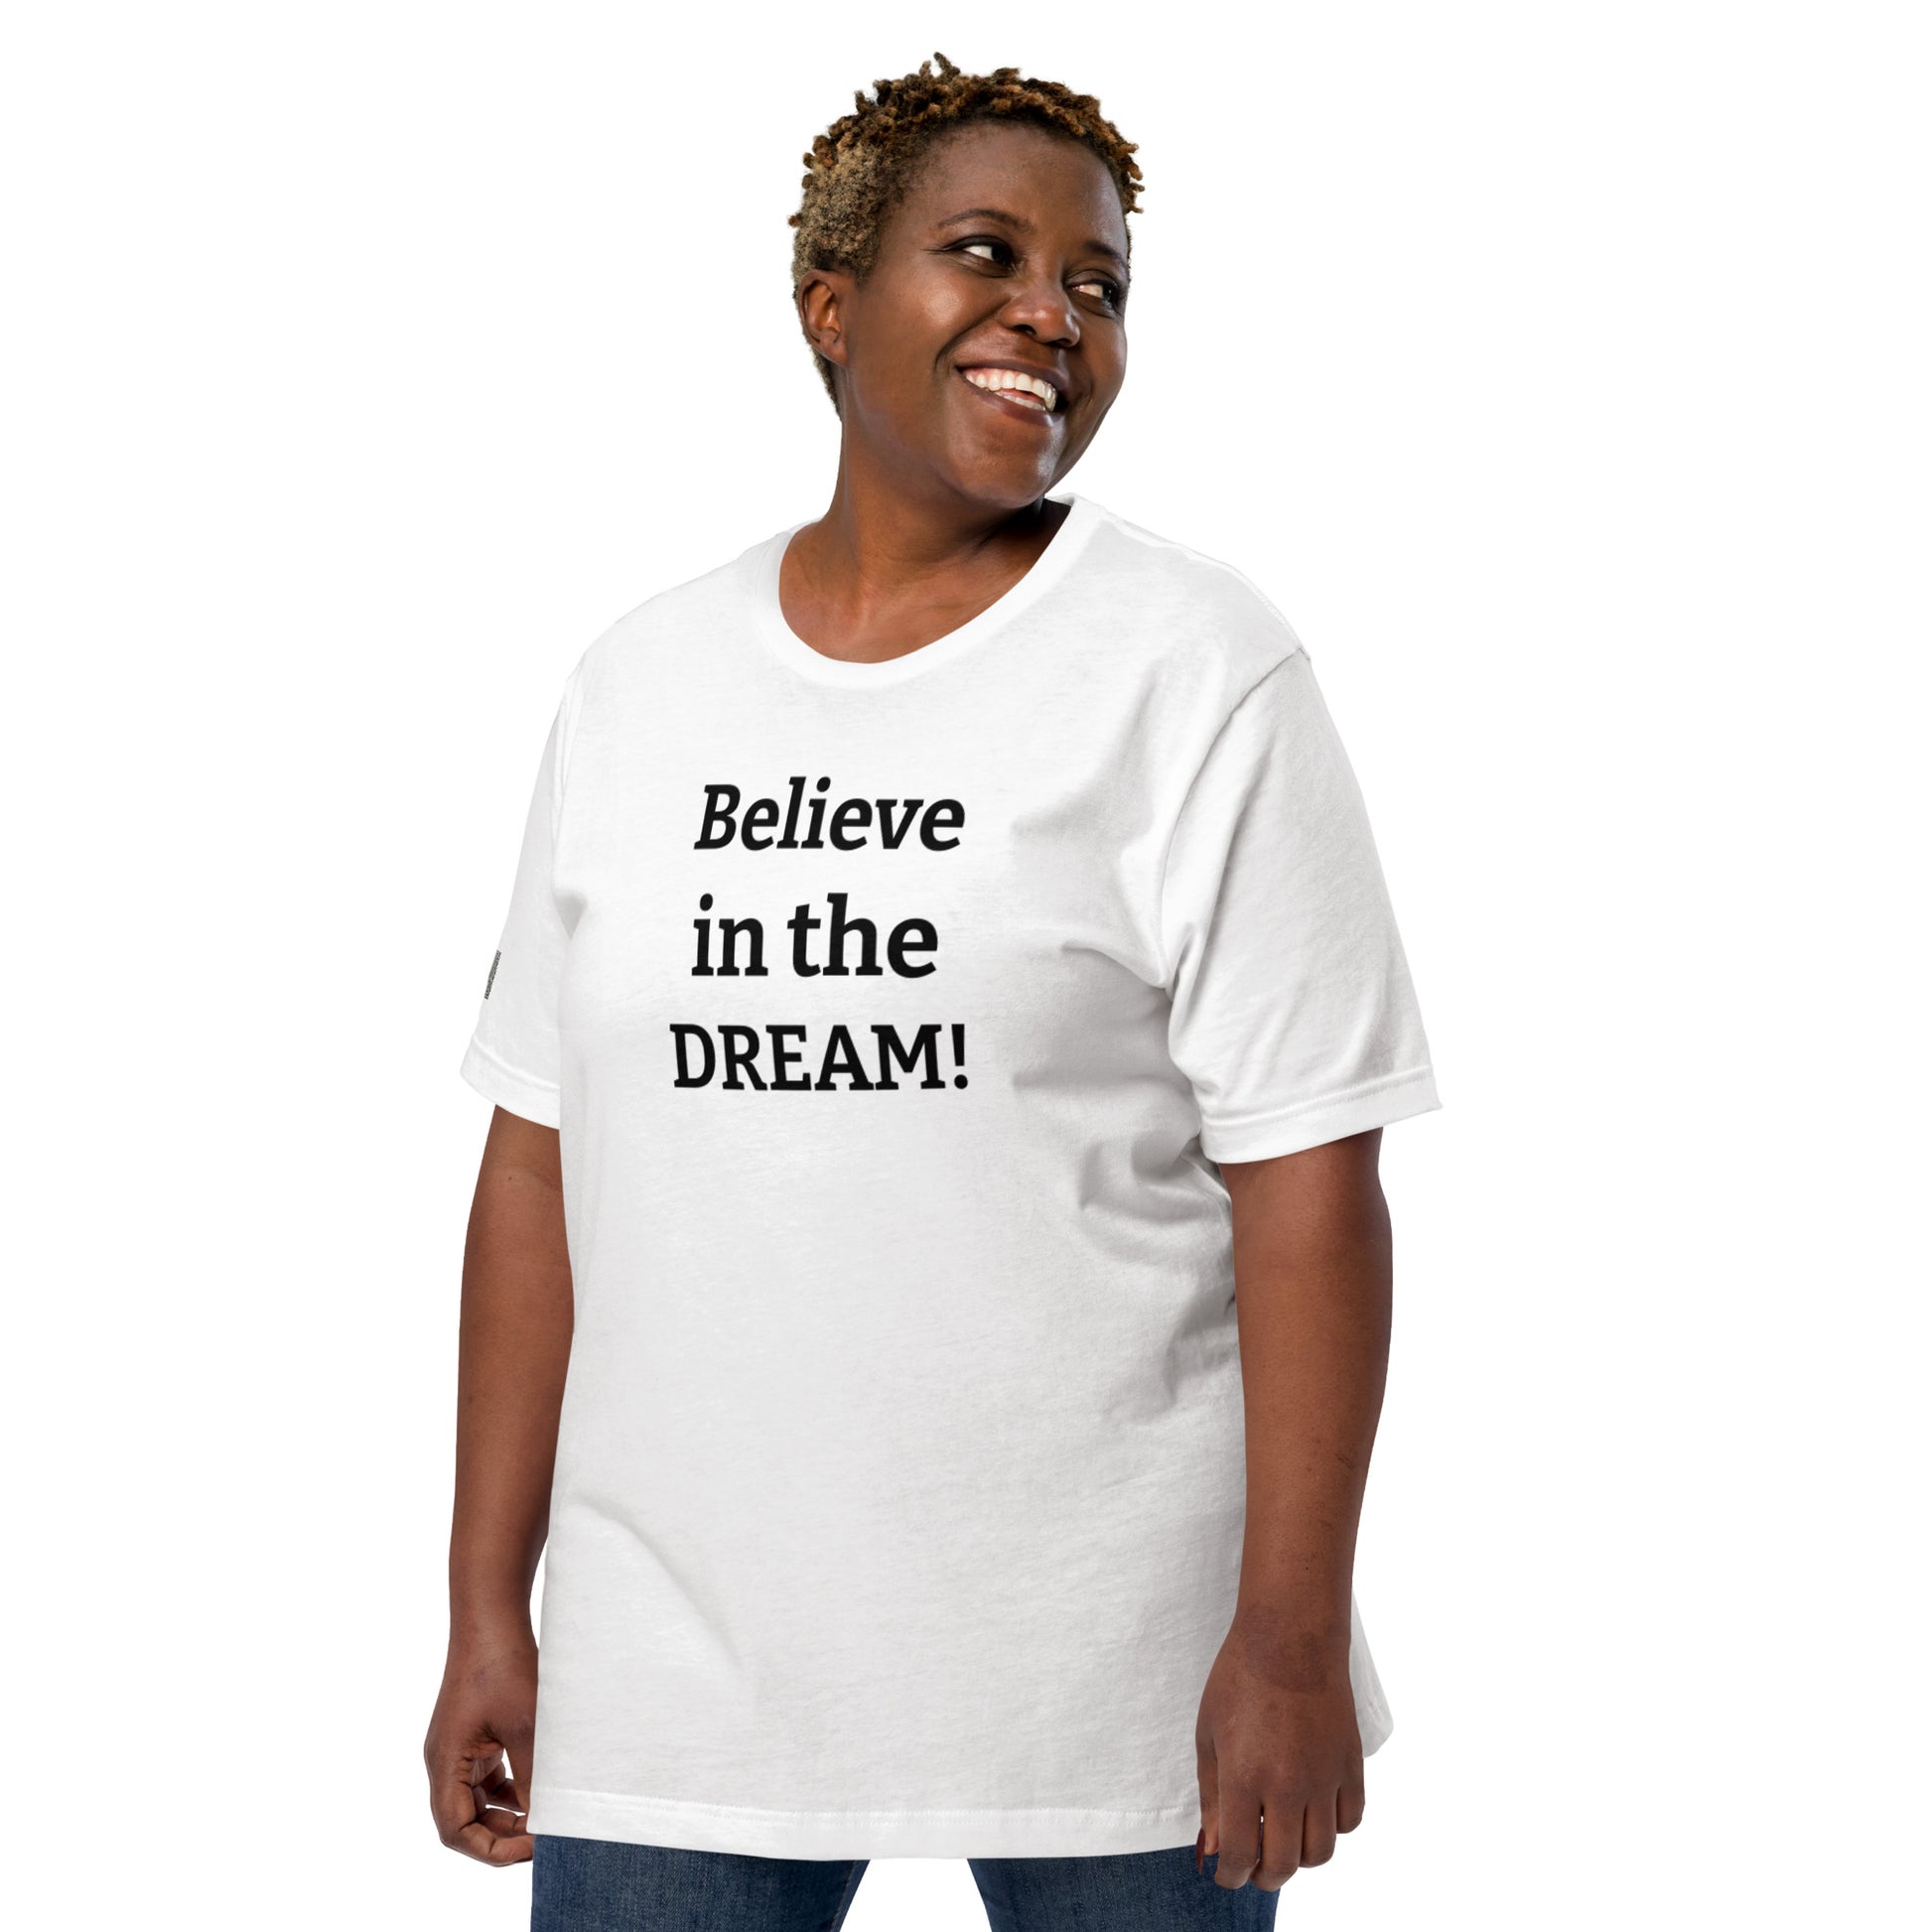 Believe in the DREAM! White T-Shirt Unisex